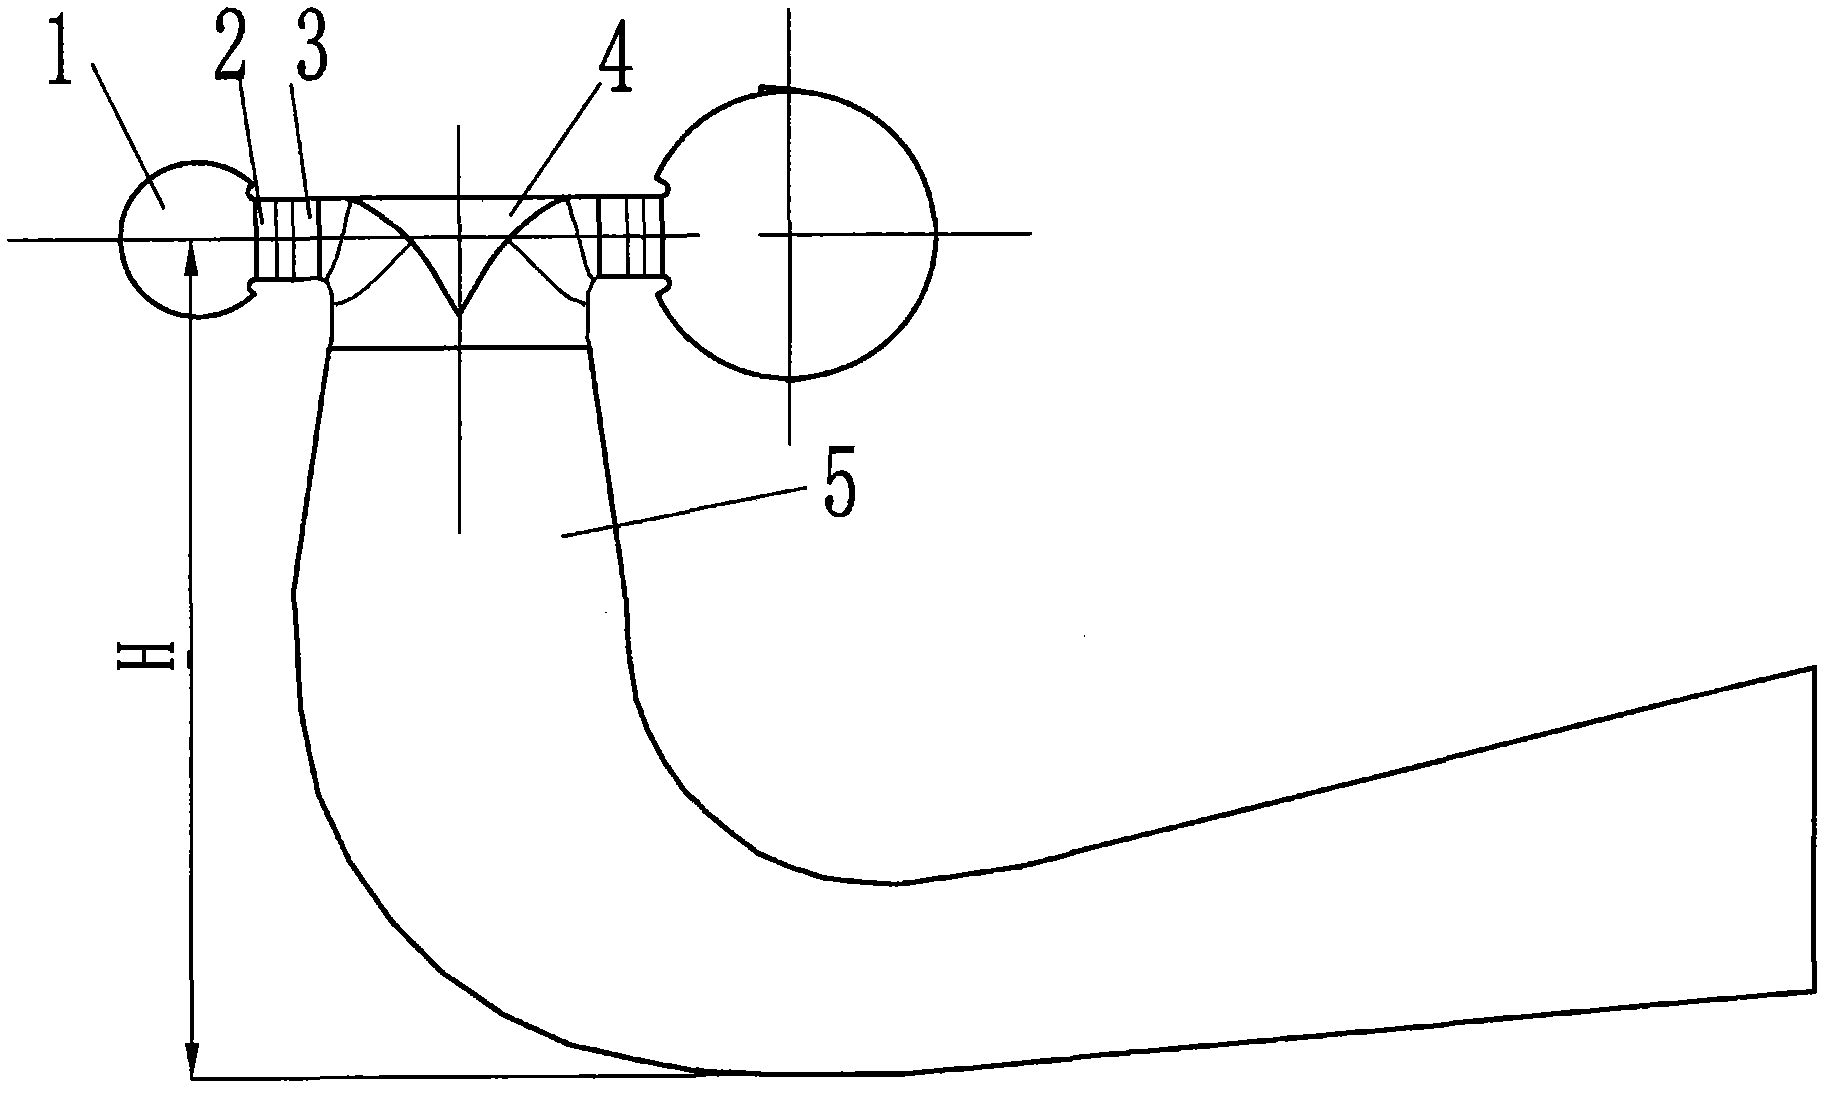 Radial-axial flow turbine employing novel guide blade and runner blade profile